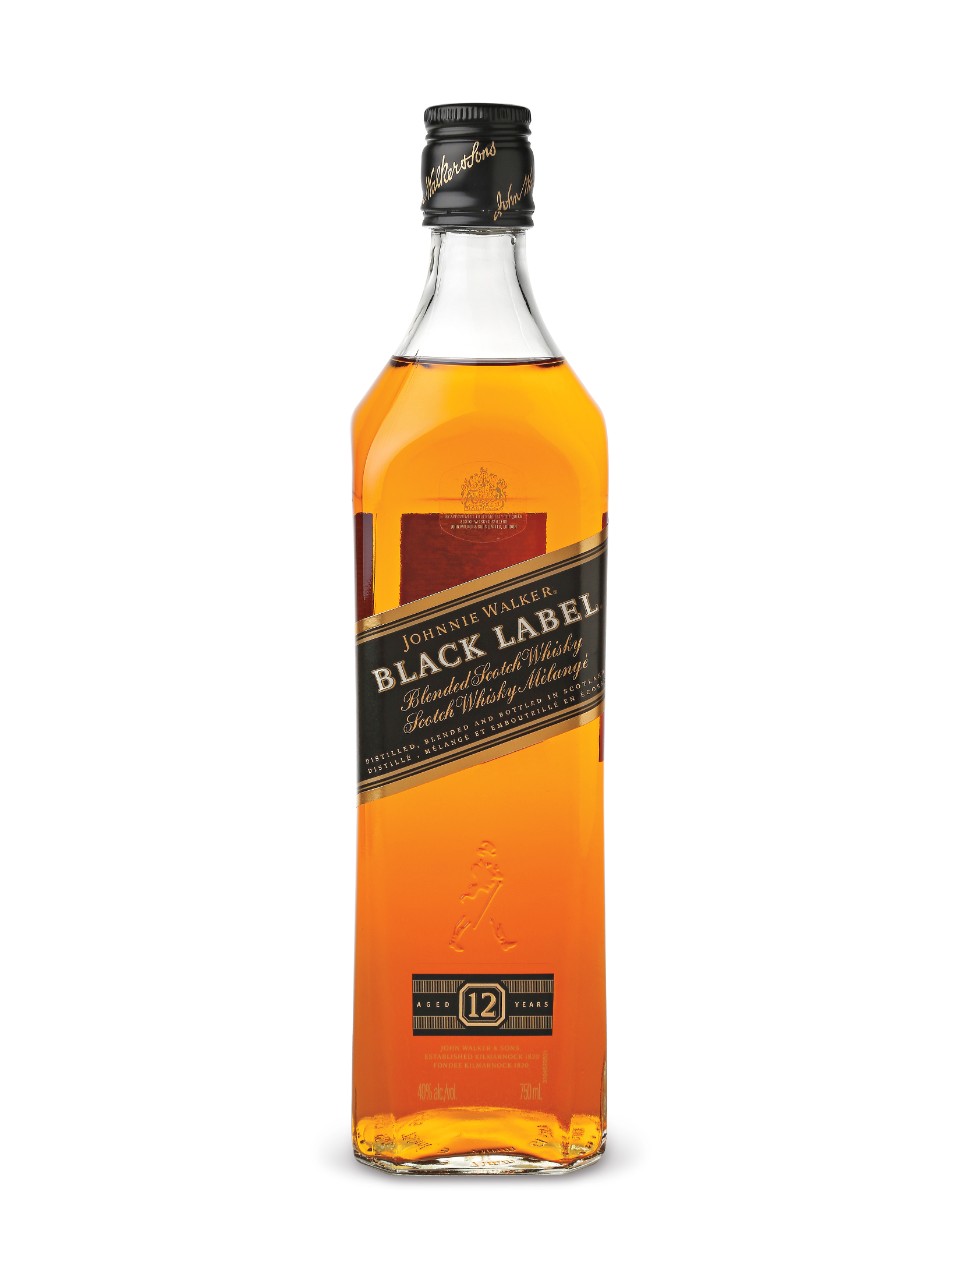 Amazing Johnnie Walker Scotch Whisky  Pictures & Backgrounds